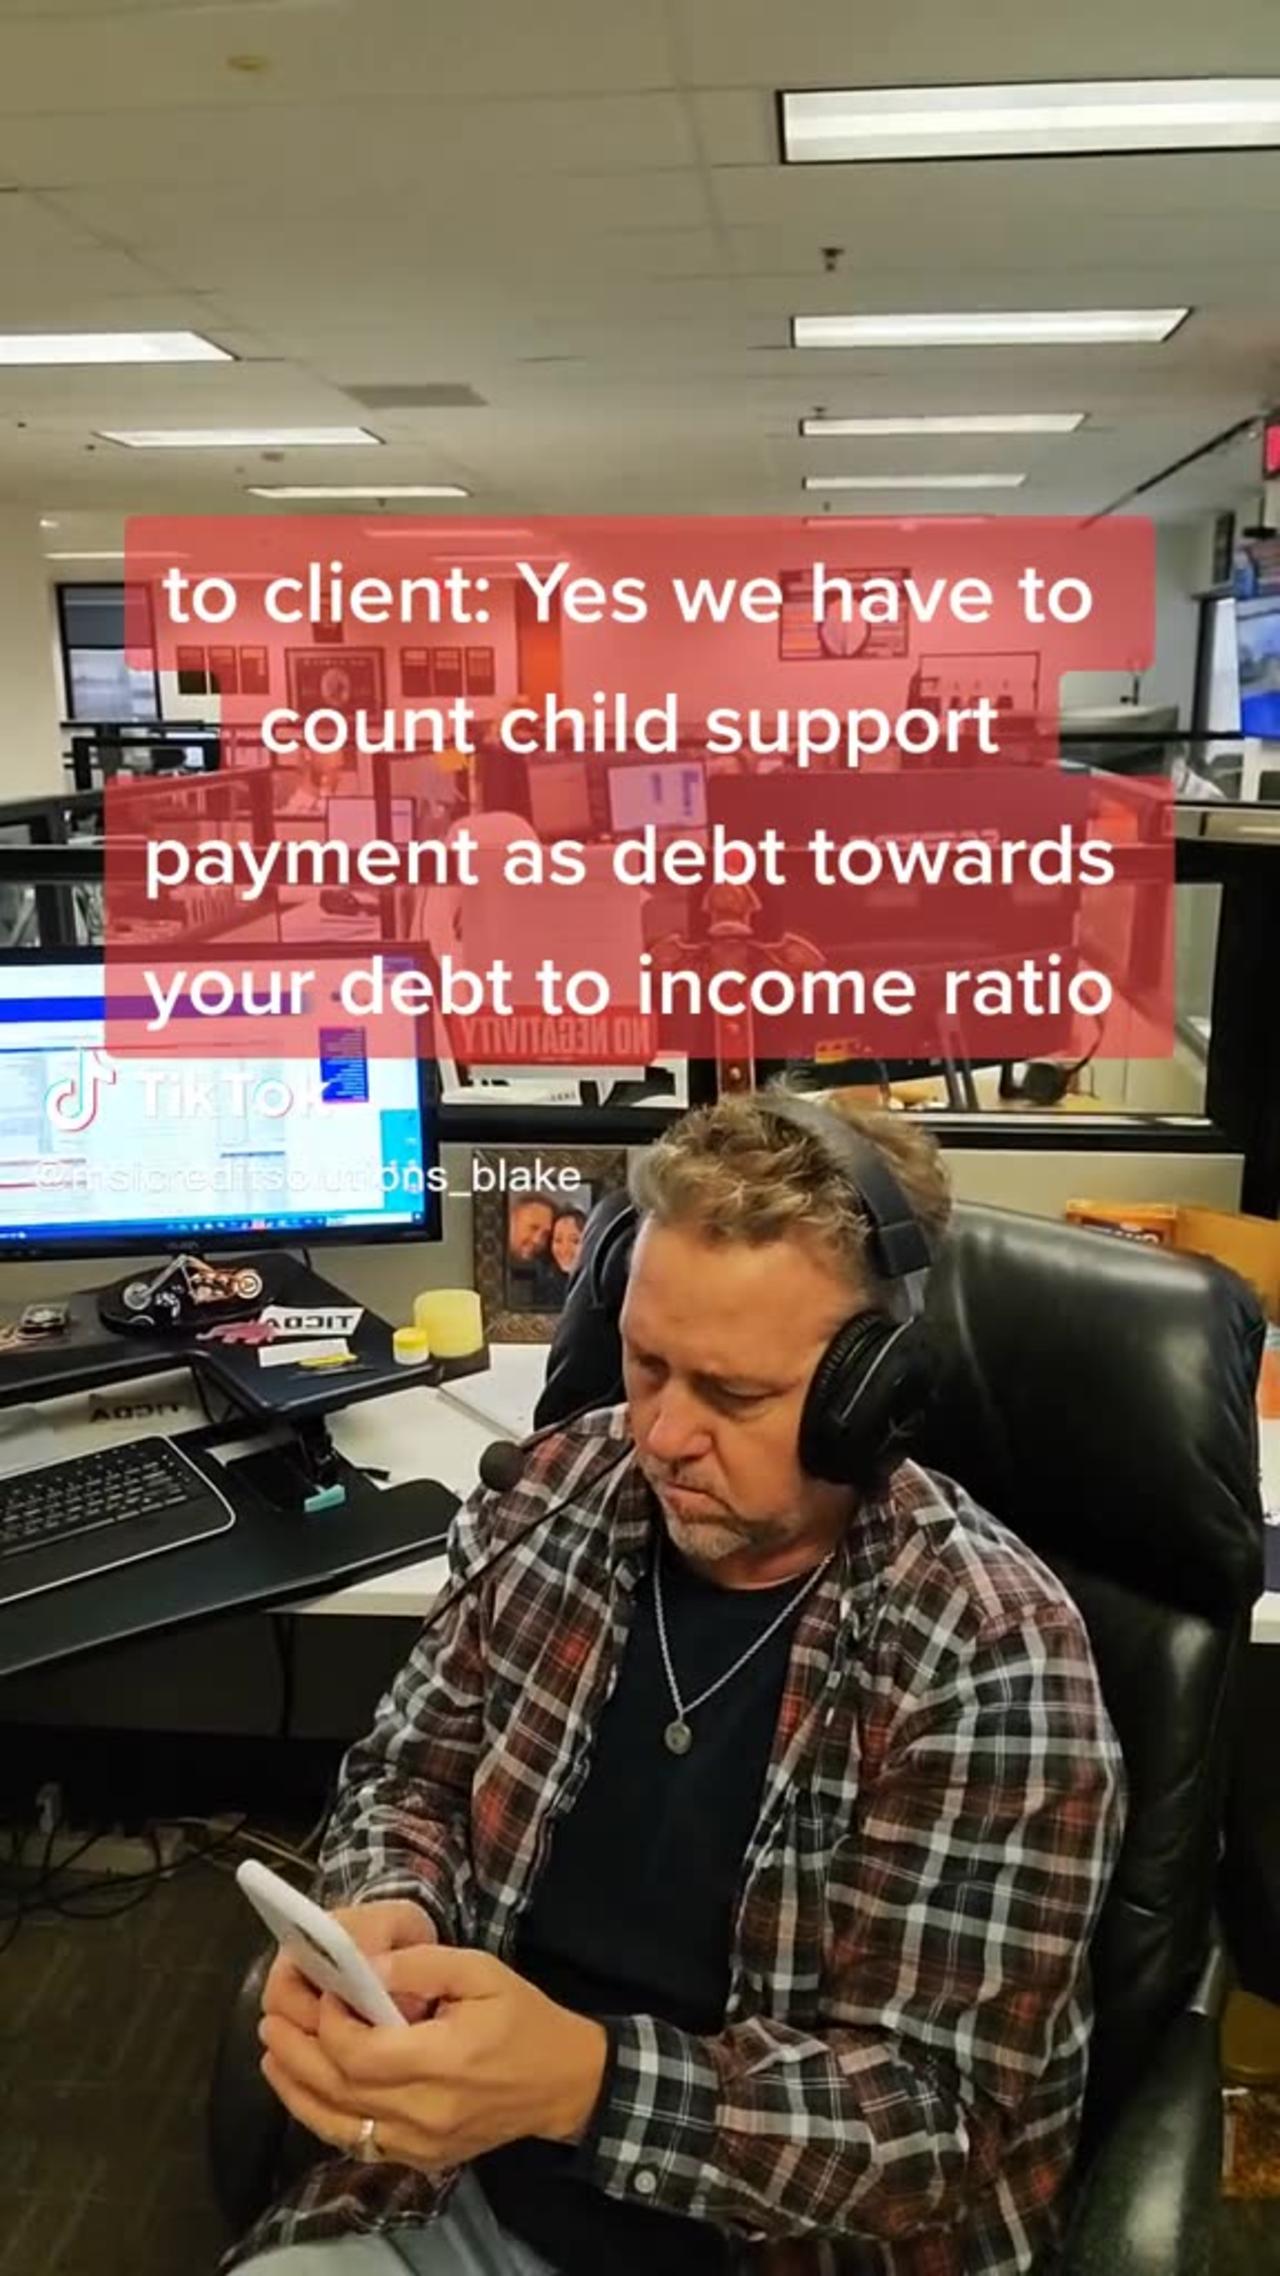 child support is calculated in DTI